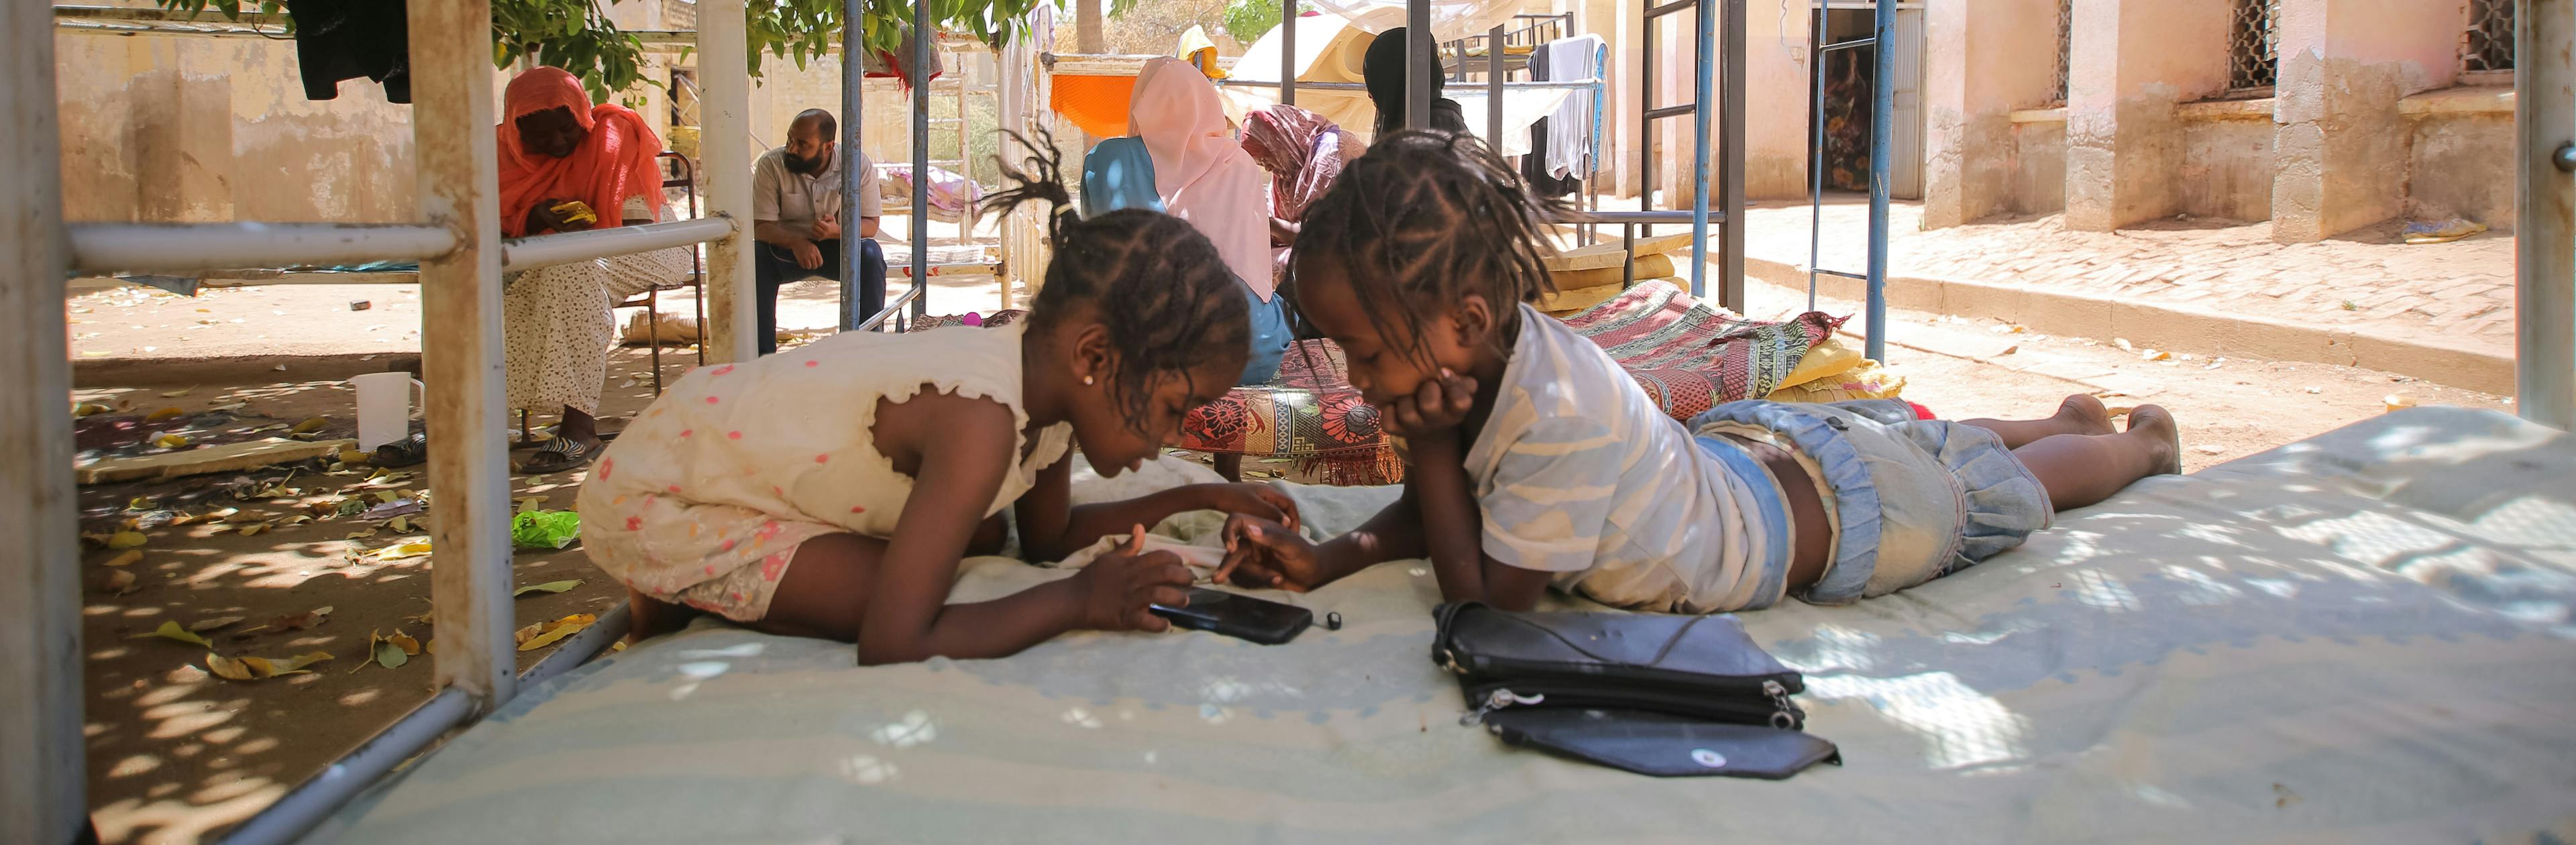 On 12 May, displaced children play games on a mobile phone at a temporary shelter.